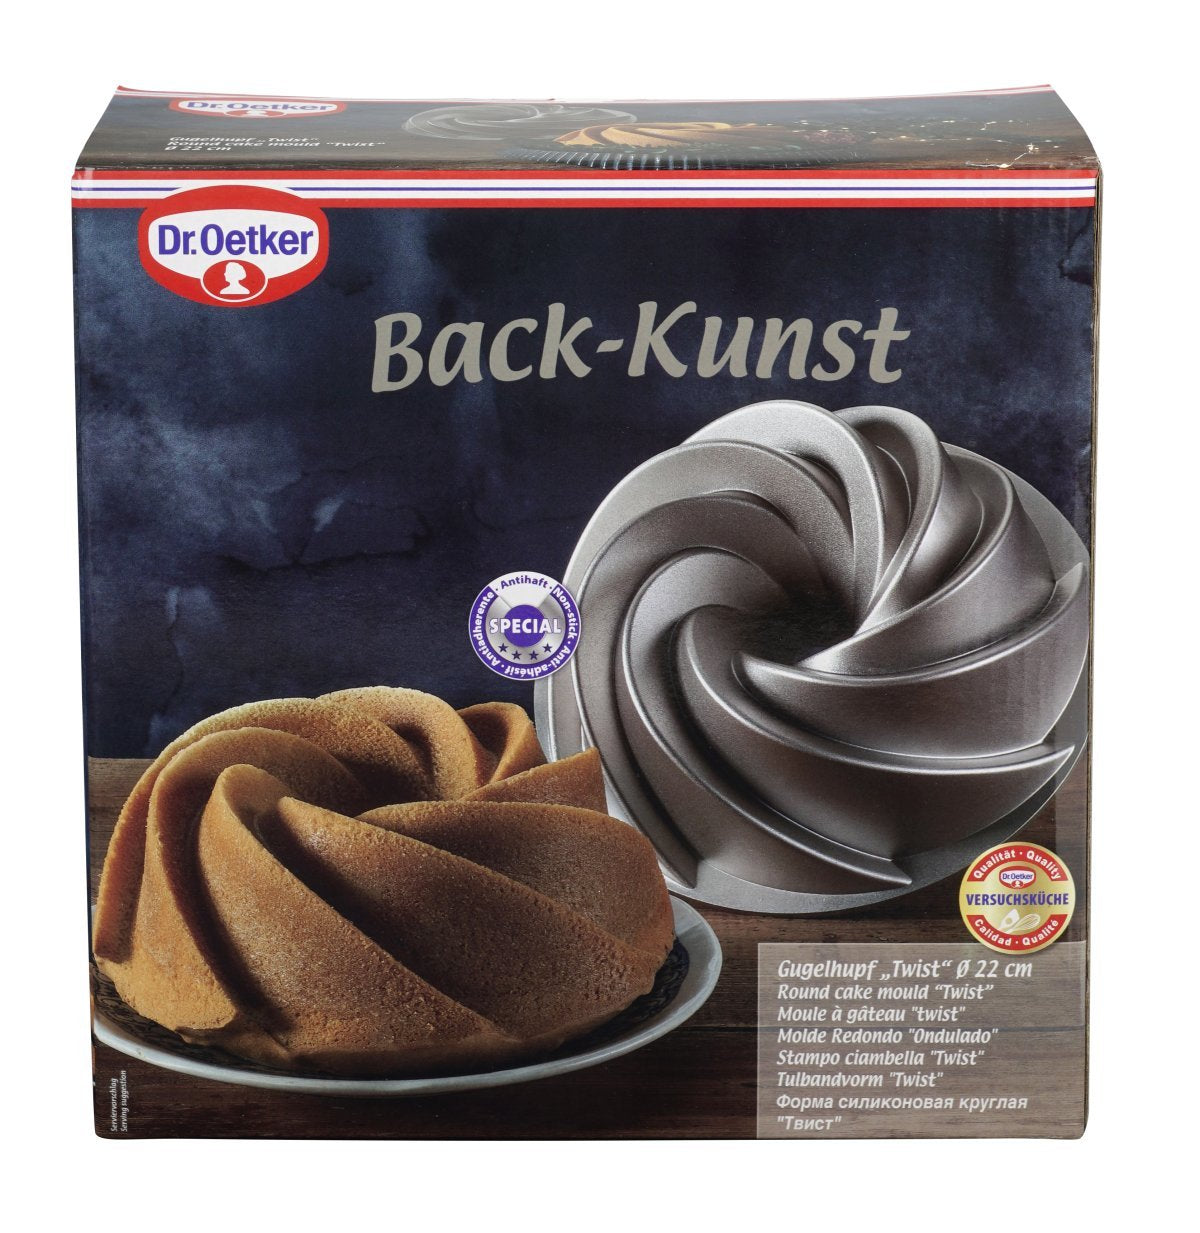 Dr. Oetker Round Cake Mould "Twist" 22X9 cm - Whole and All